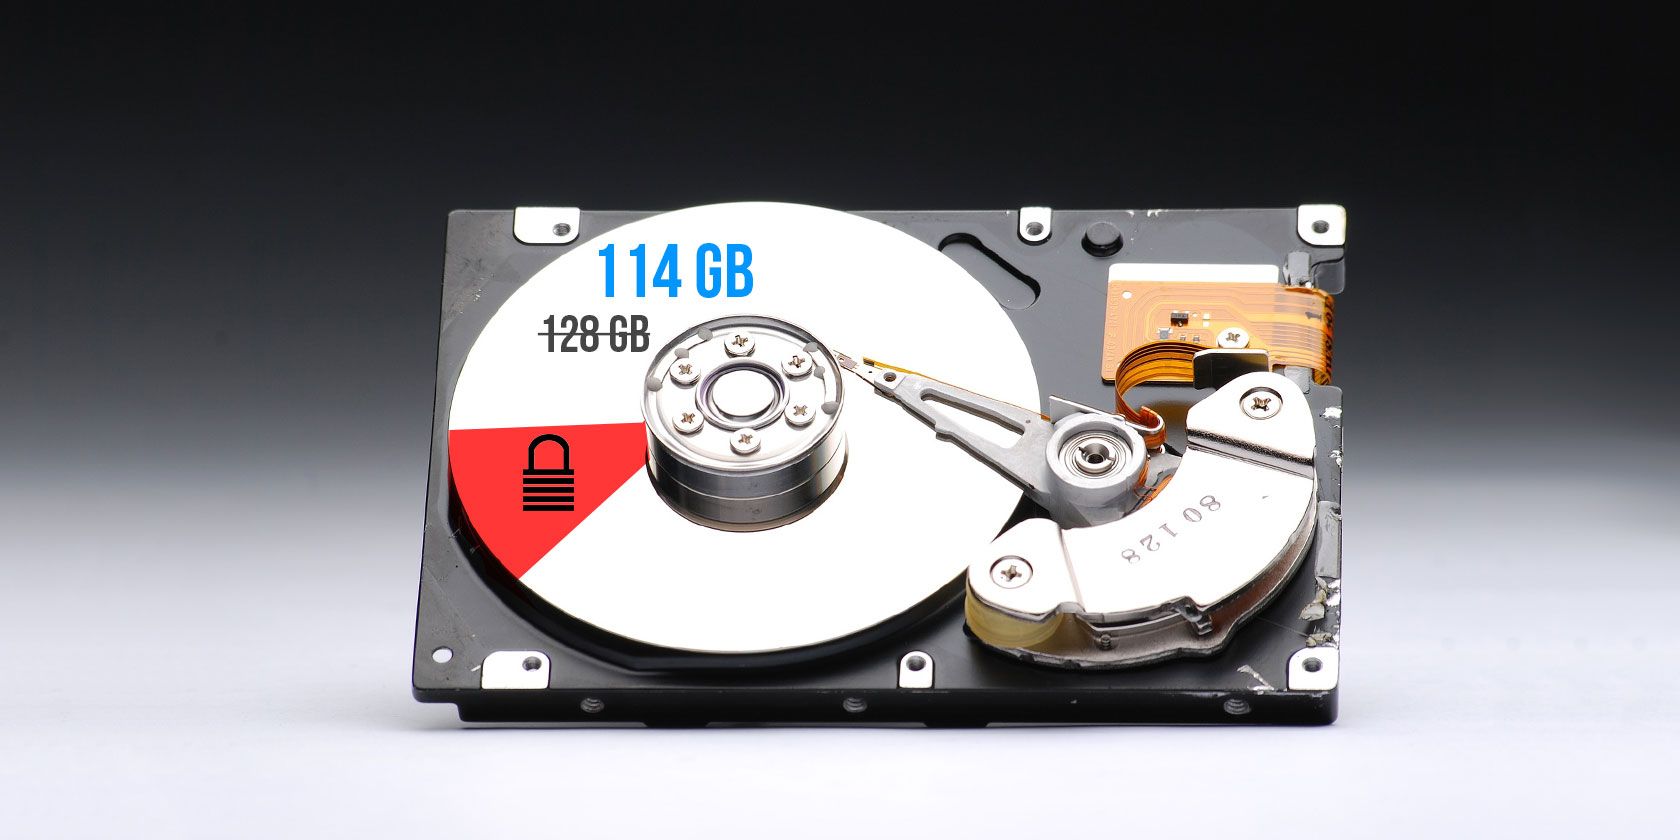 Hard Drive Sizes Explained: Why 1TB Is Only 931GB of Actual Space